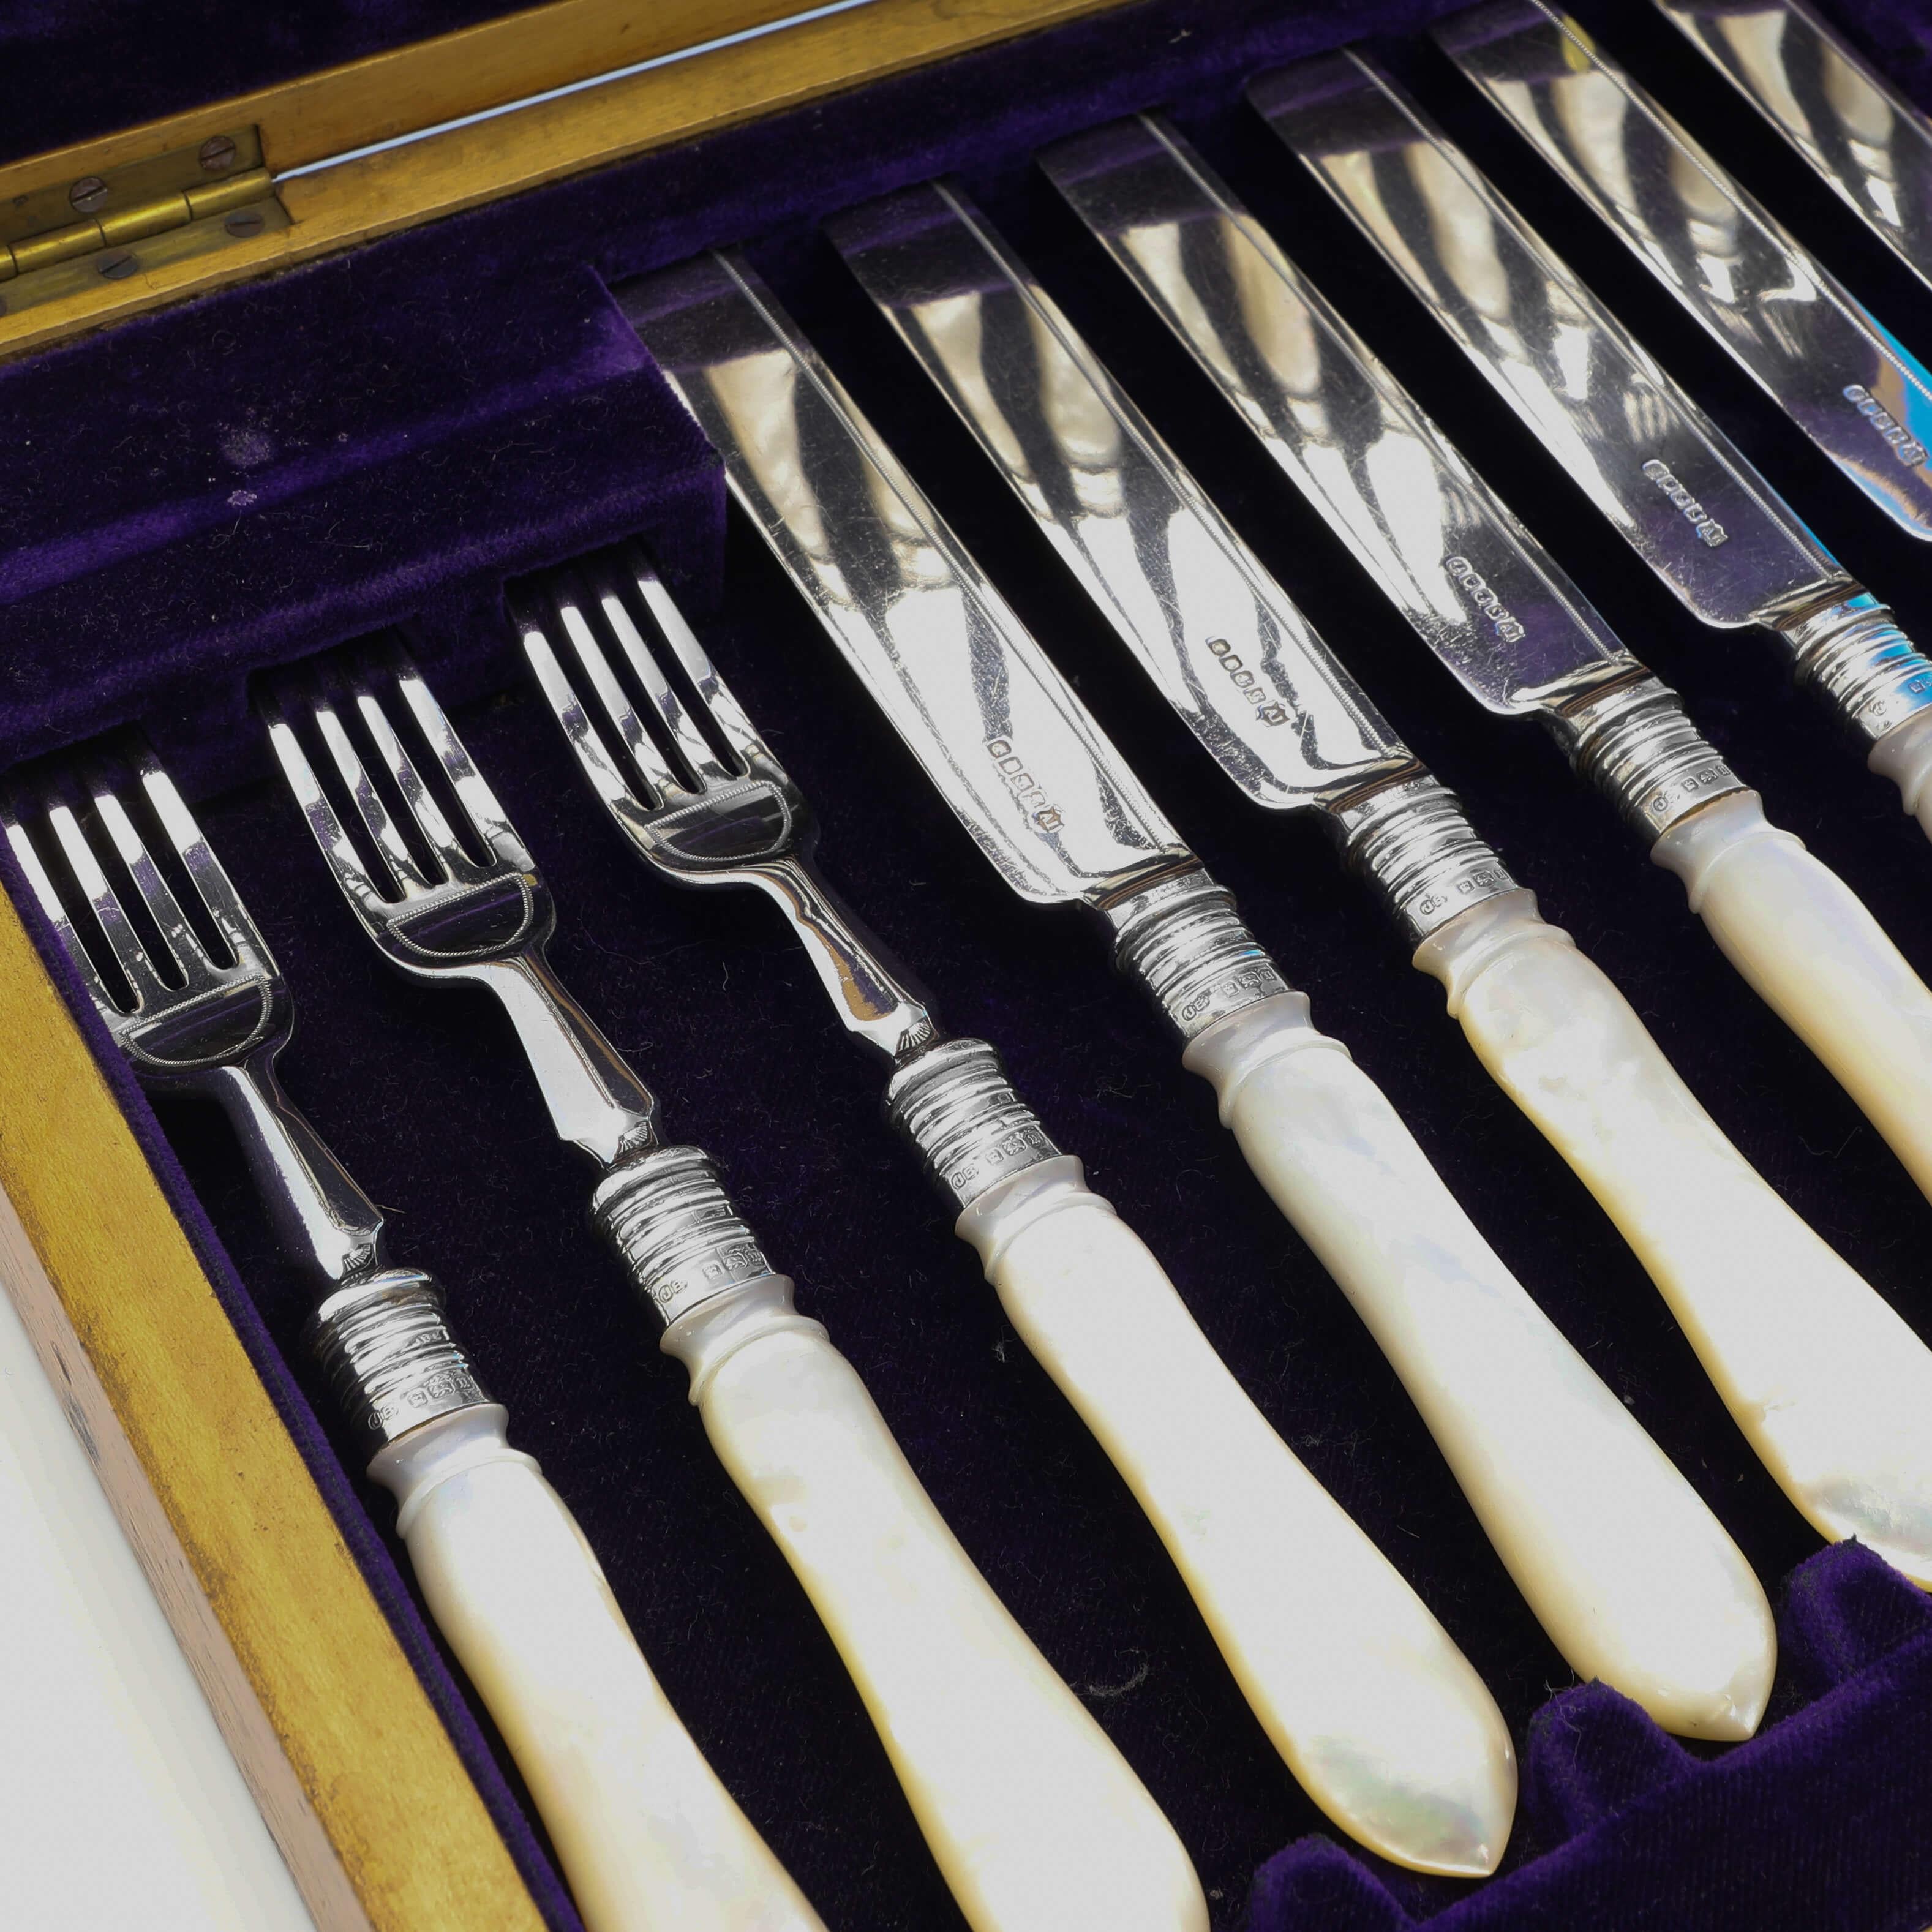 Made in Sheffield in 1912 by John Biggin, this stylish, Antique Silver Plated Dessert Set, comprises 12 knives and 12 forks with baluster shaped mother of pearl handles and hallmarked sterling silver collars. 

Each knife measures 8.25